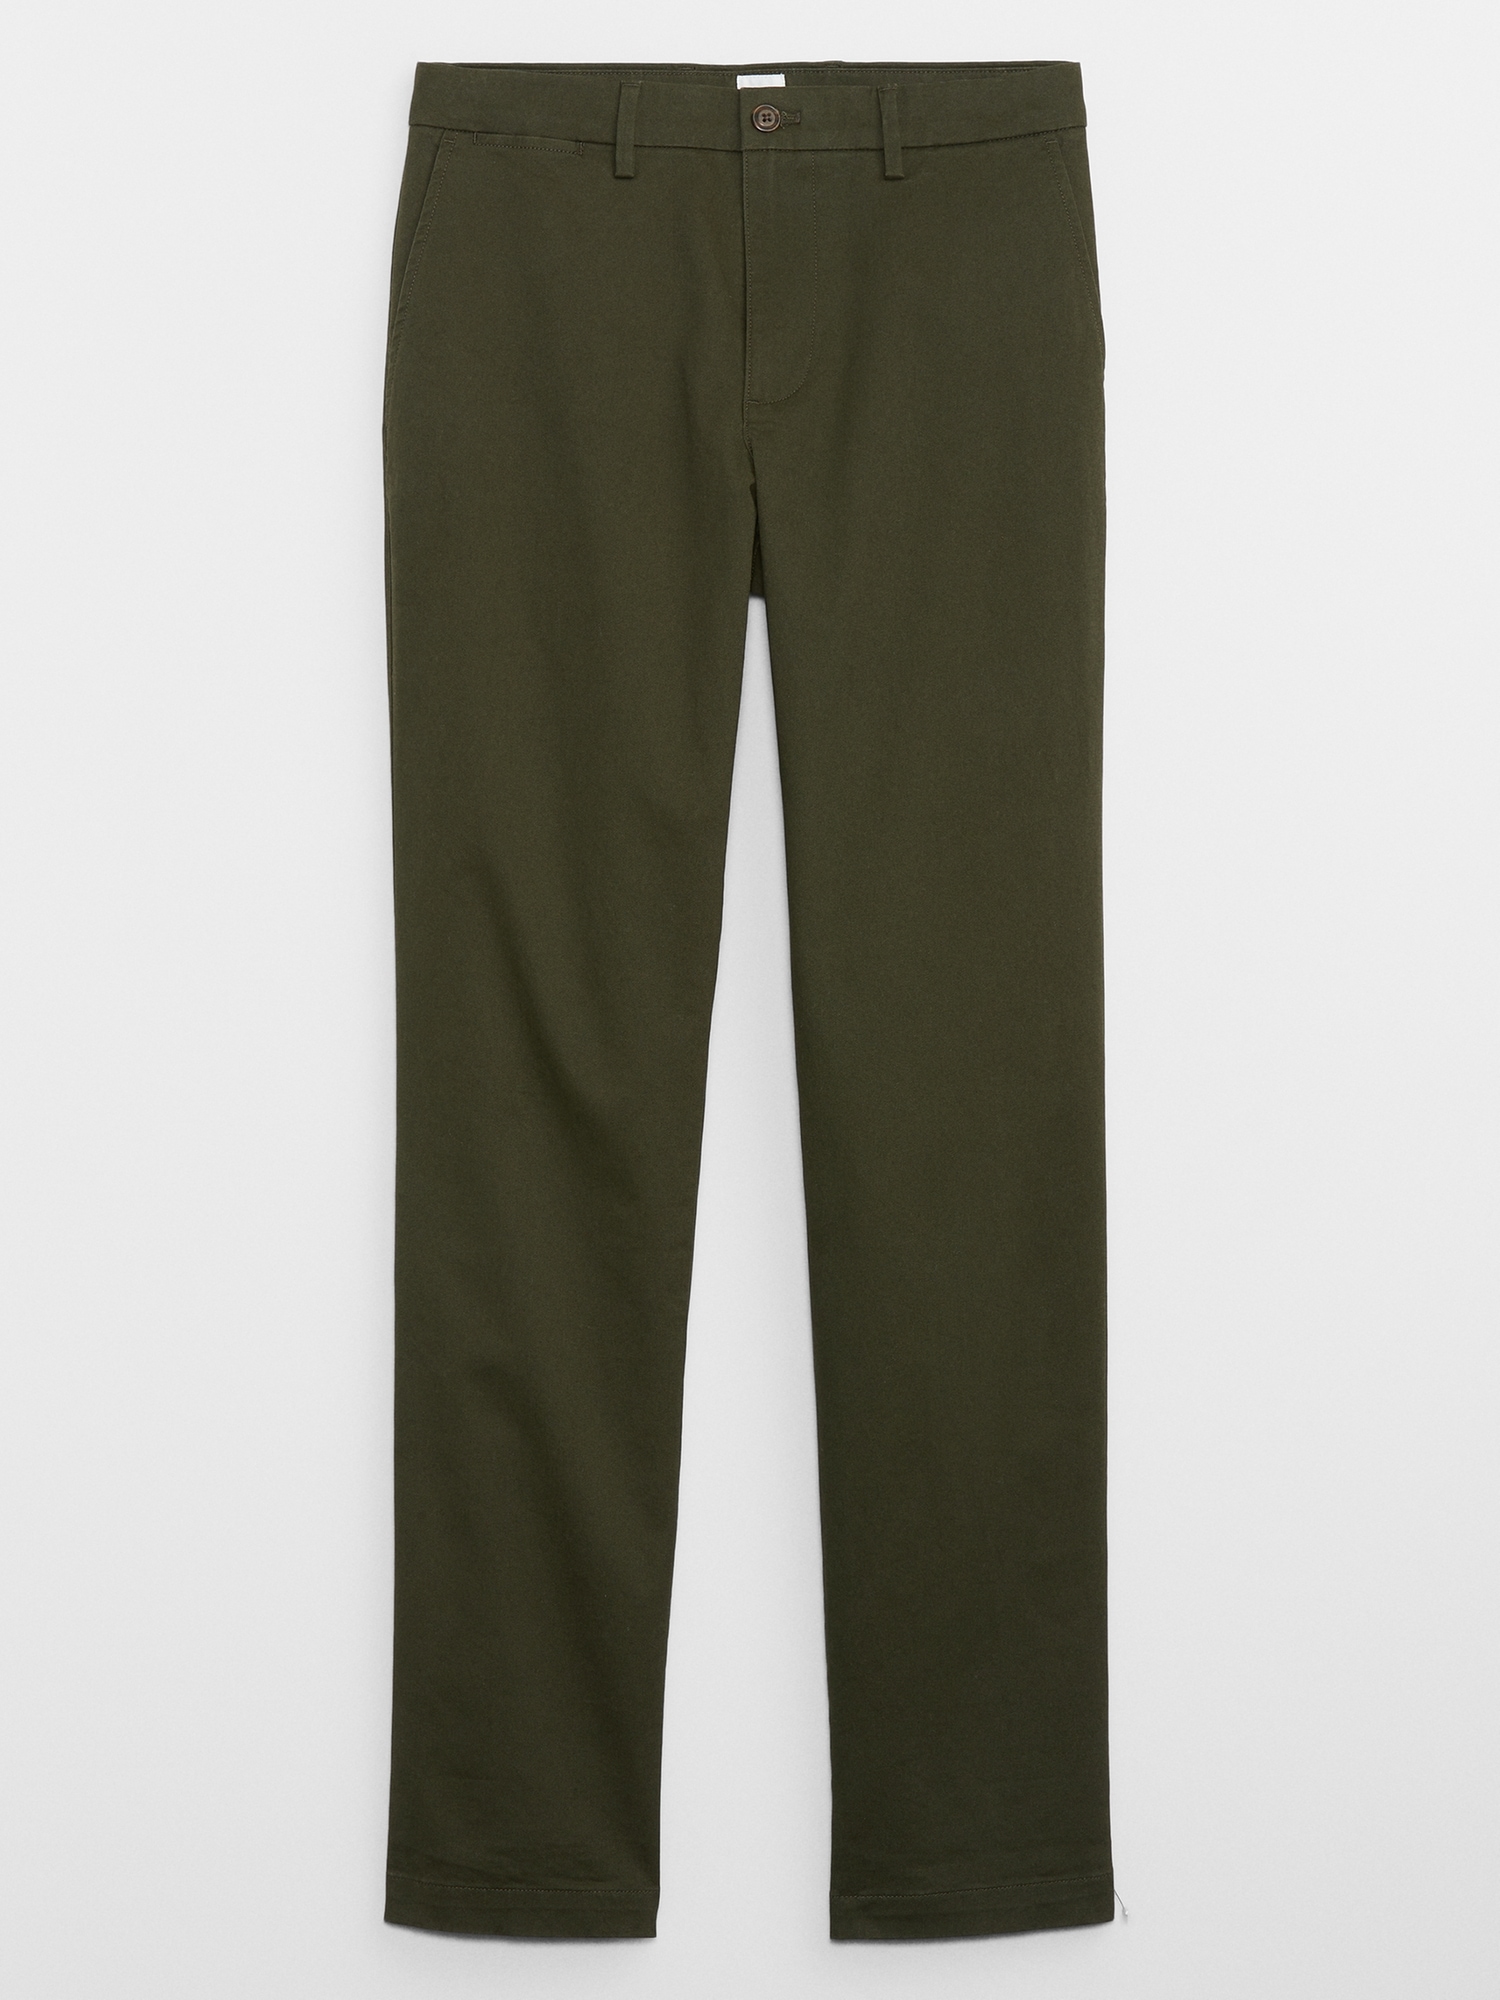 Gap Modern Khakis In Straight Fit With Gapflex New Classic Navy